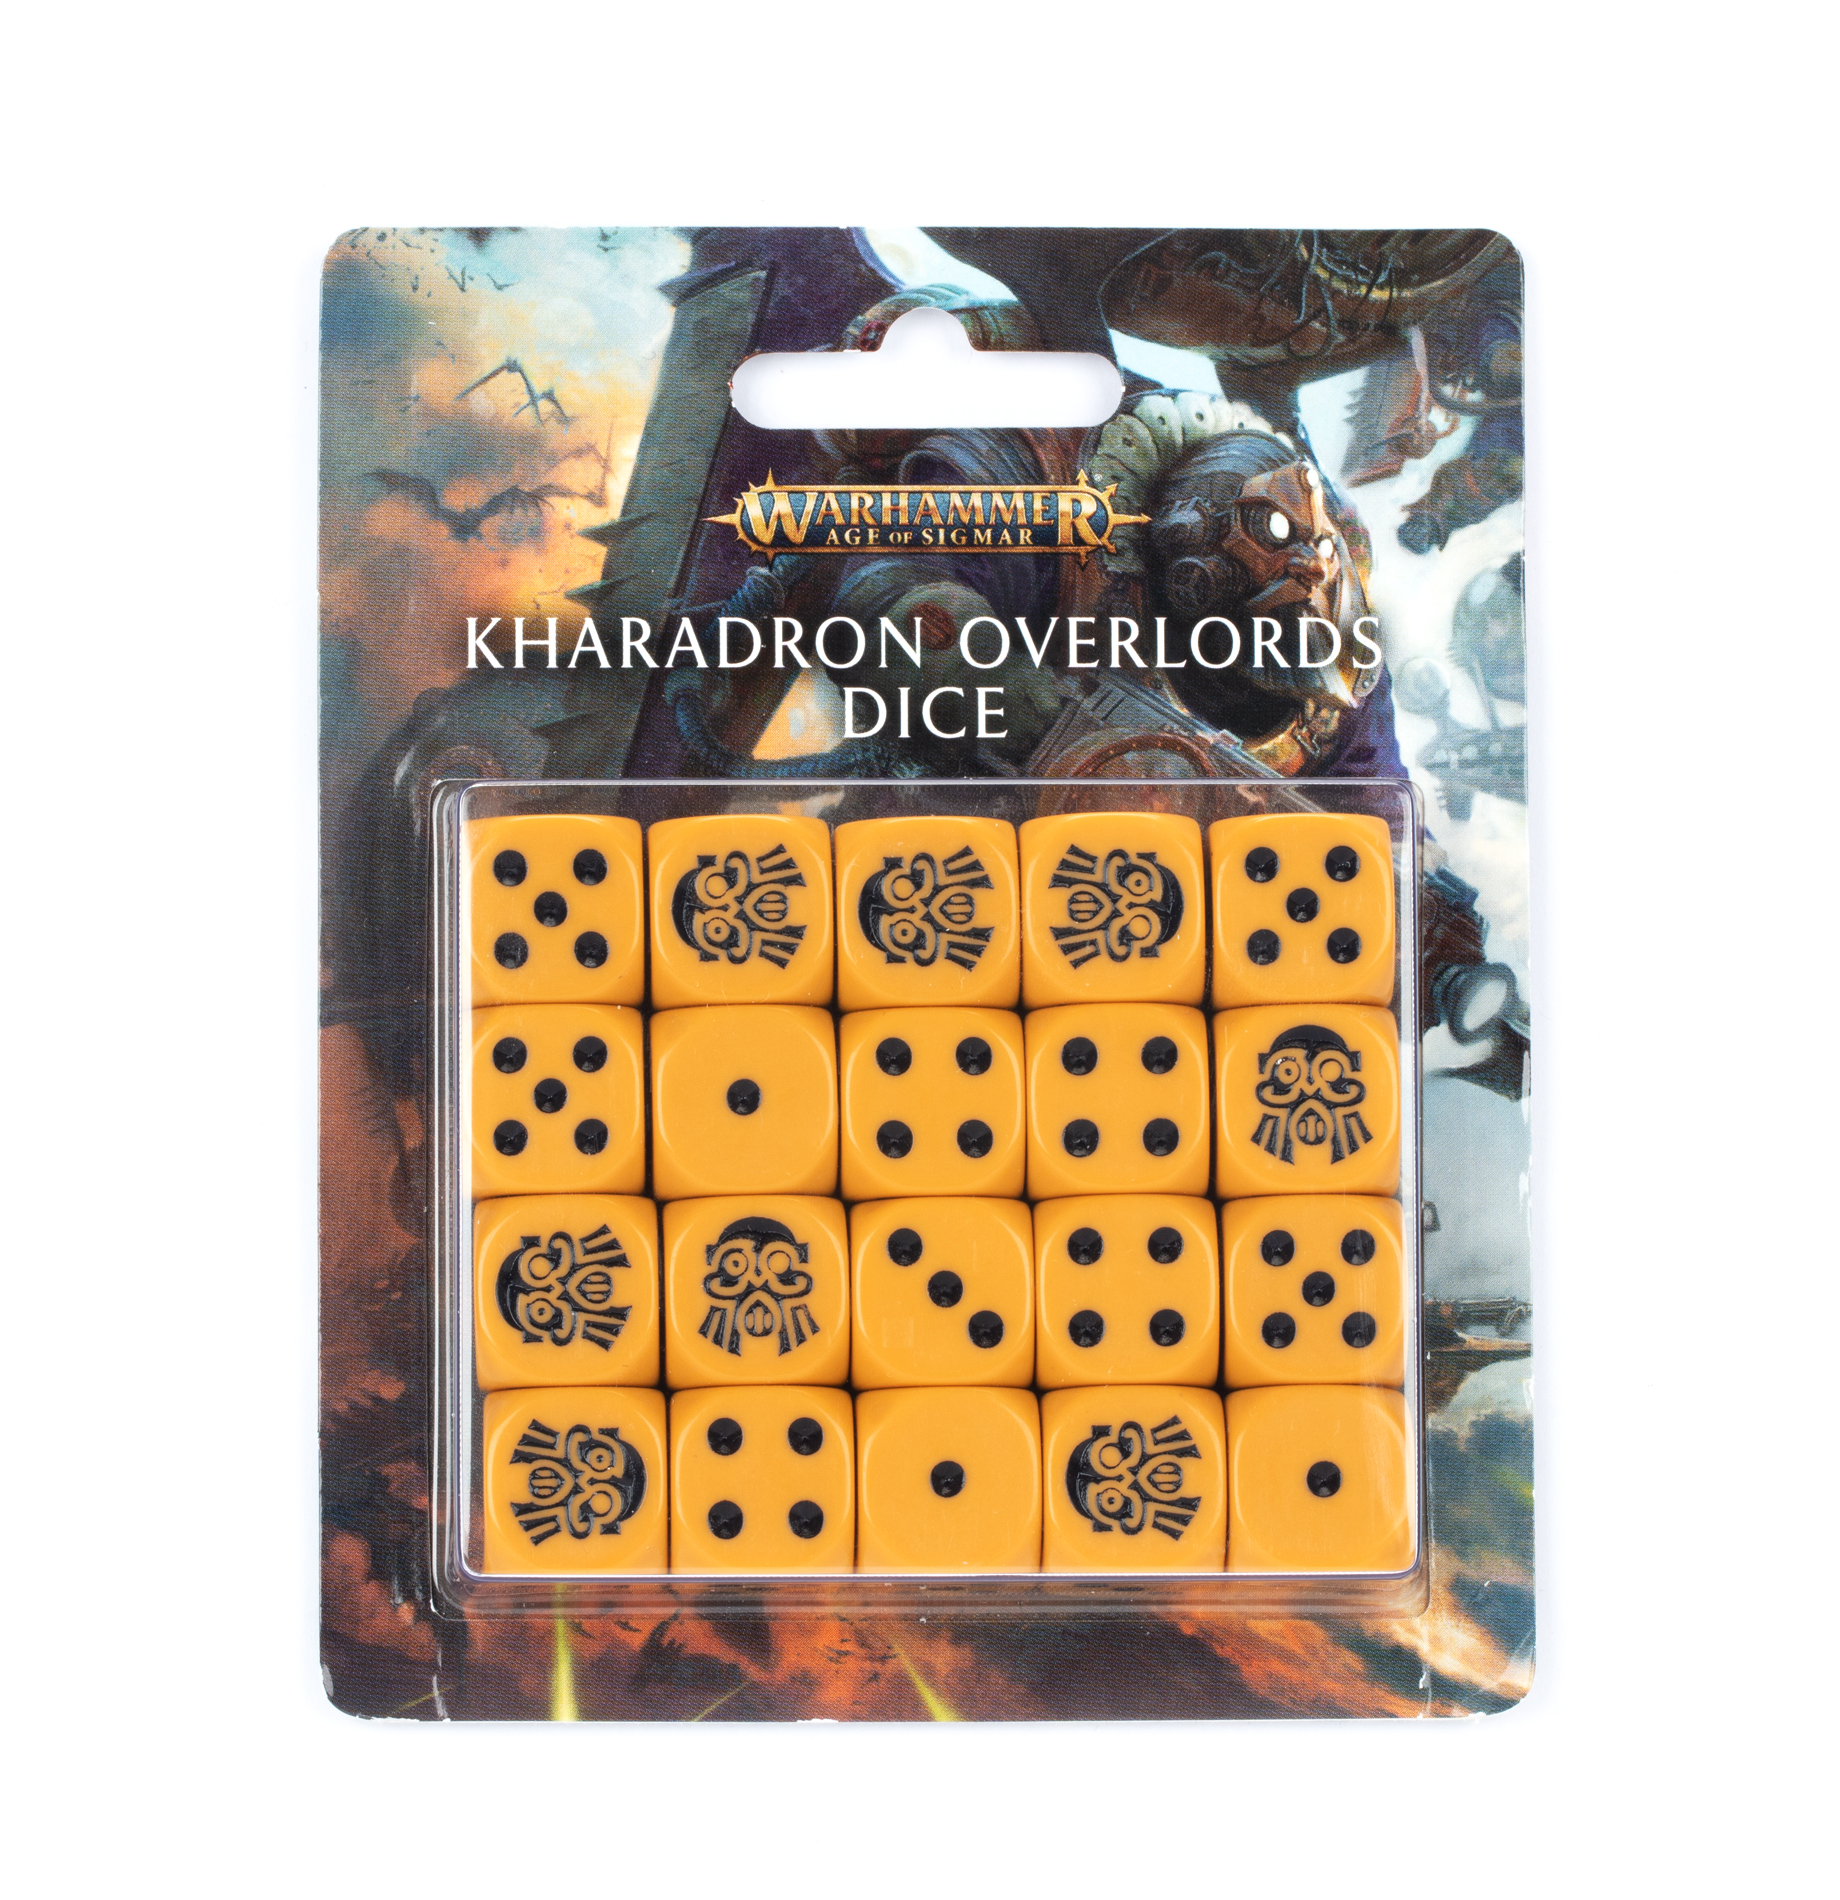 Kharadron Overlords Dice - 84-64 - Warhammer Age of Sigmar